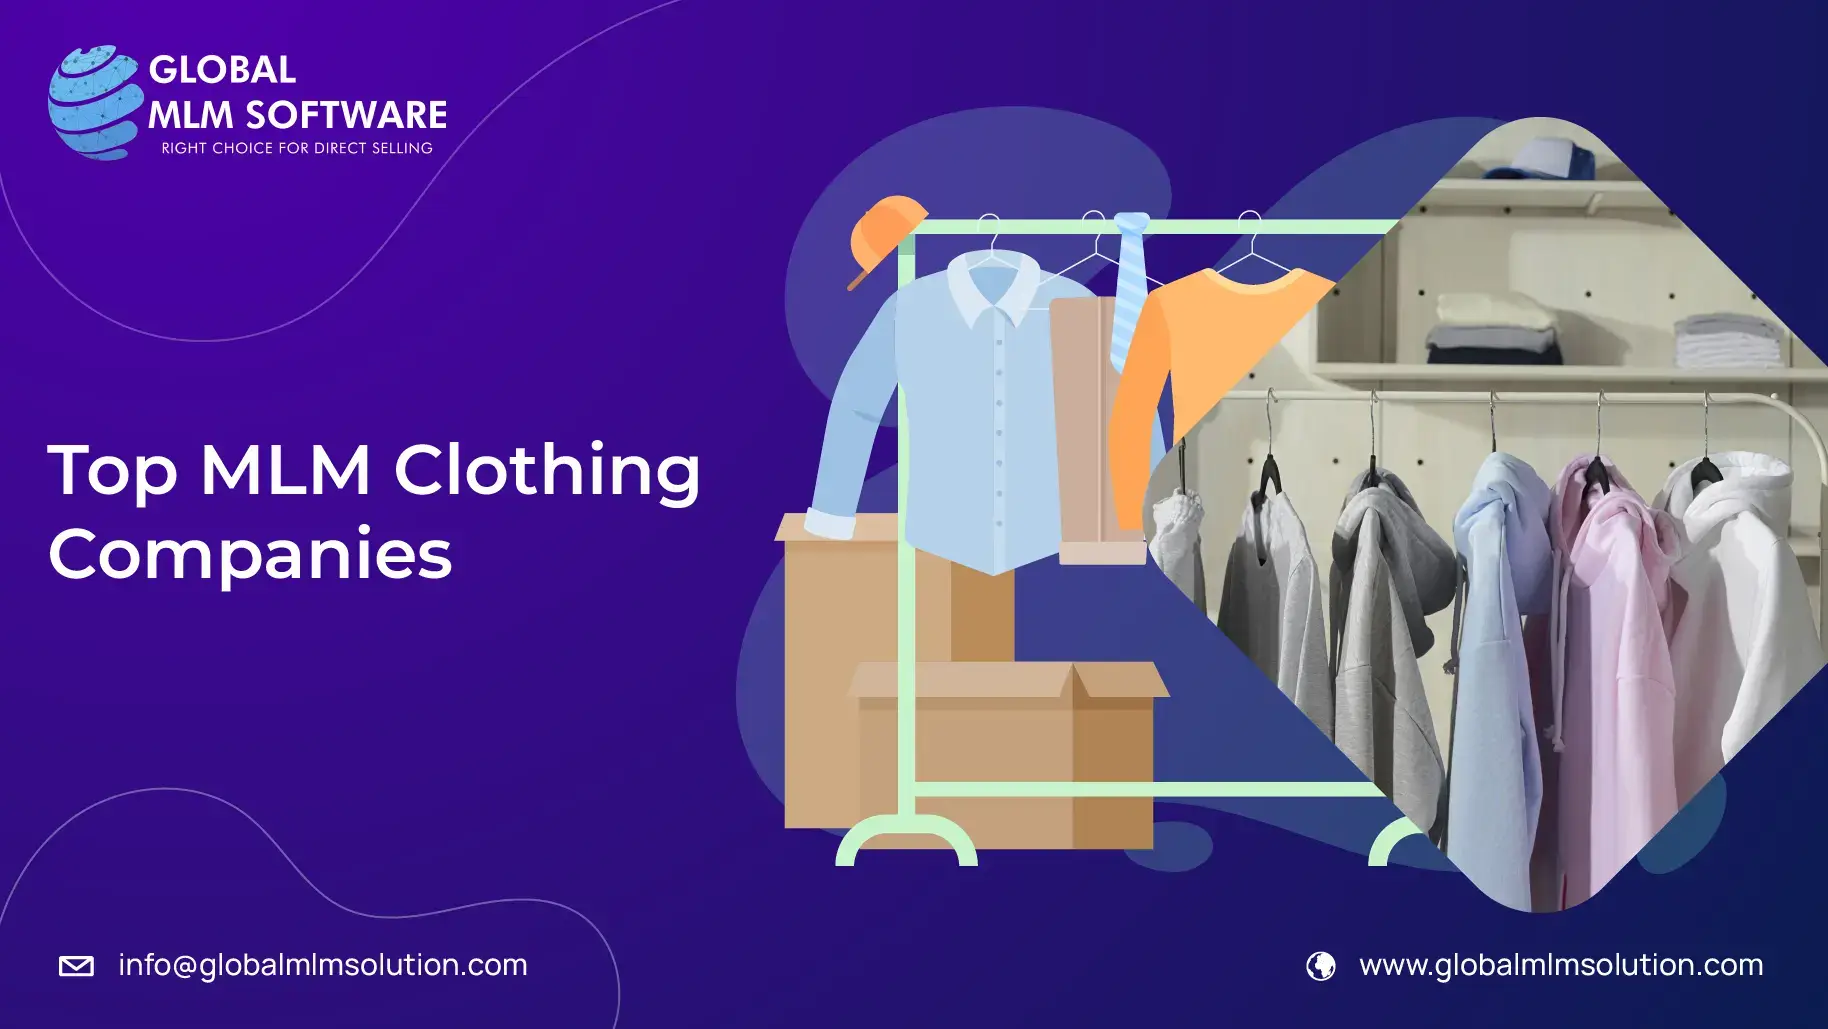 Top MLM Clothing Companies